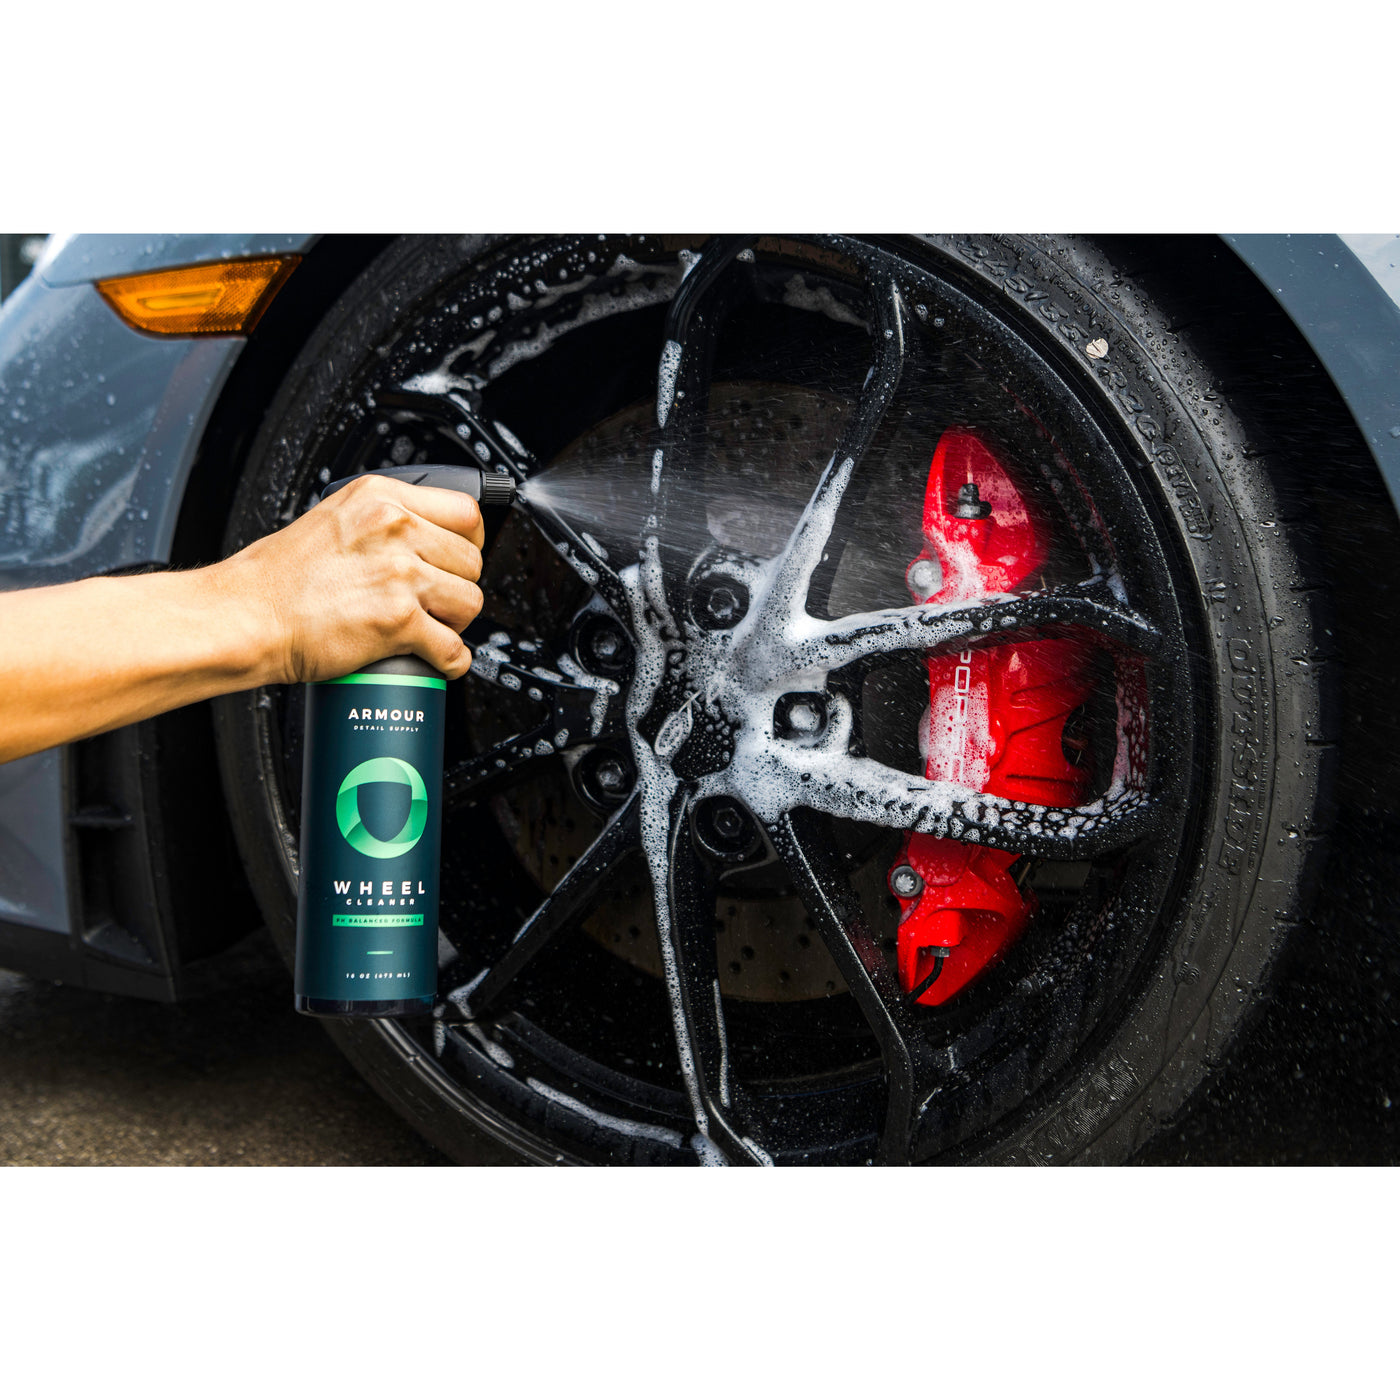 Limpia Llantas 750ml Clean Rm — The boutique for your car